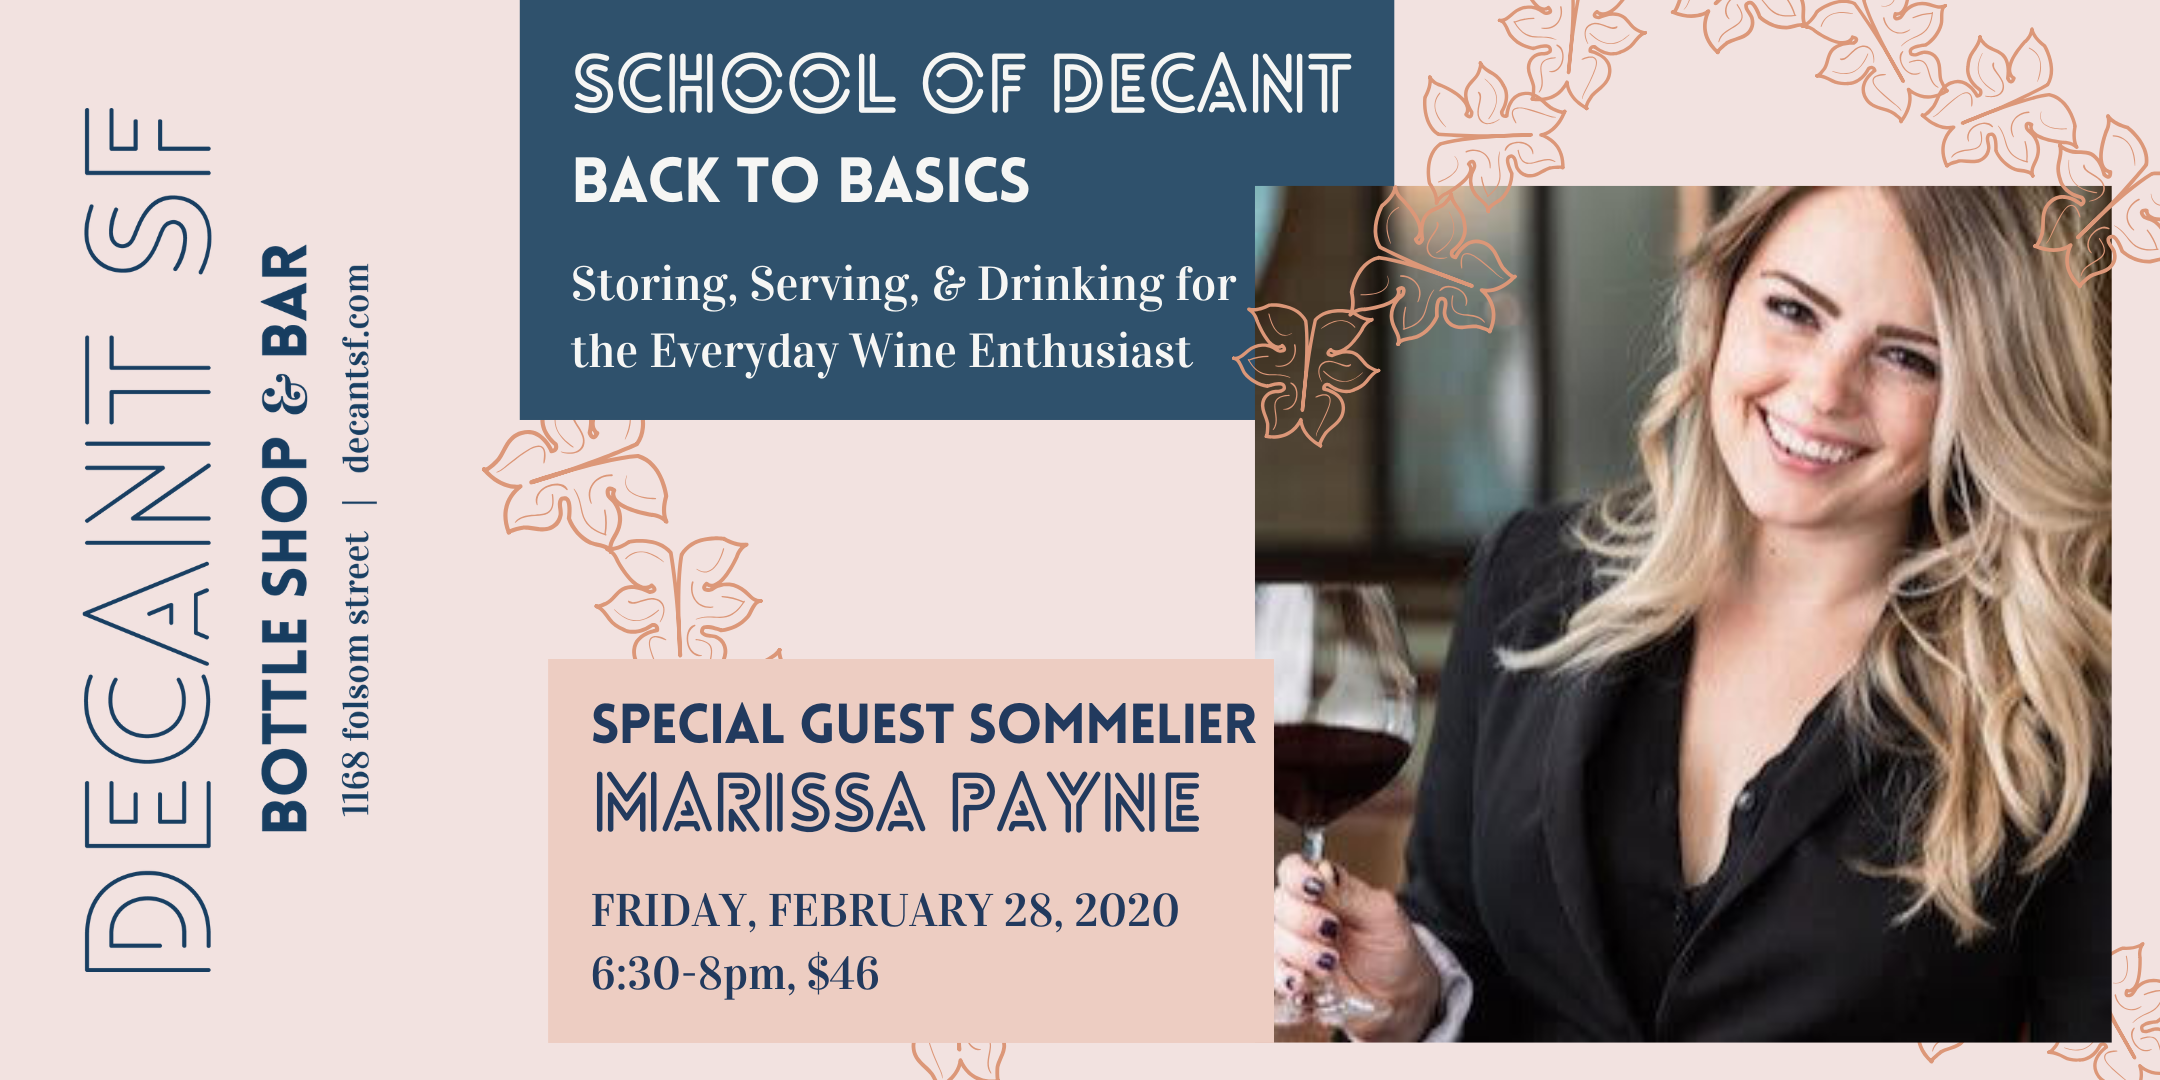 School of DECANT: Back to Basics of tasting, drinking, and serving wine